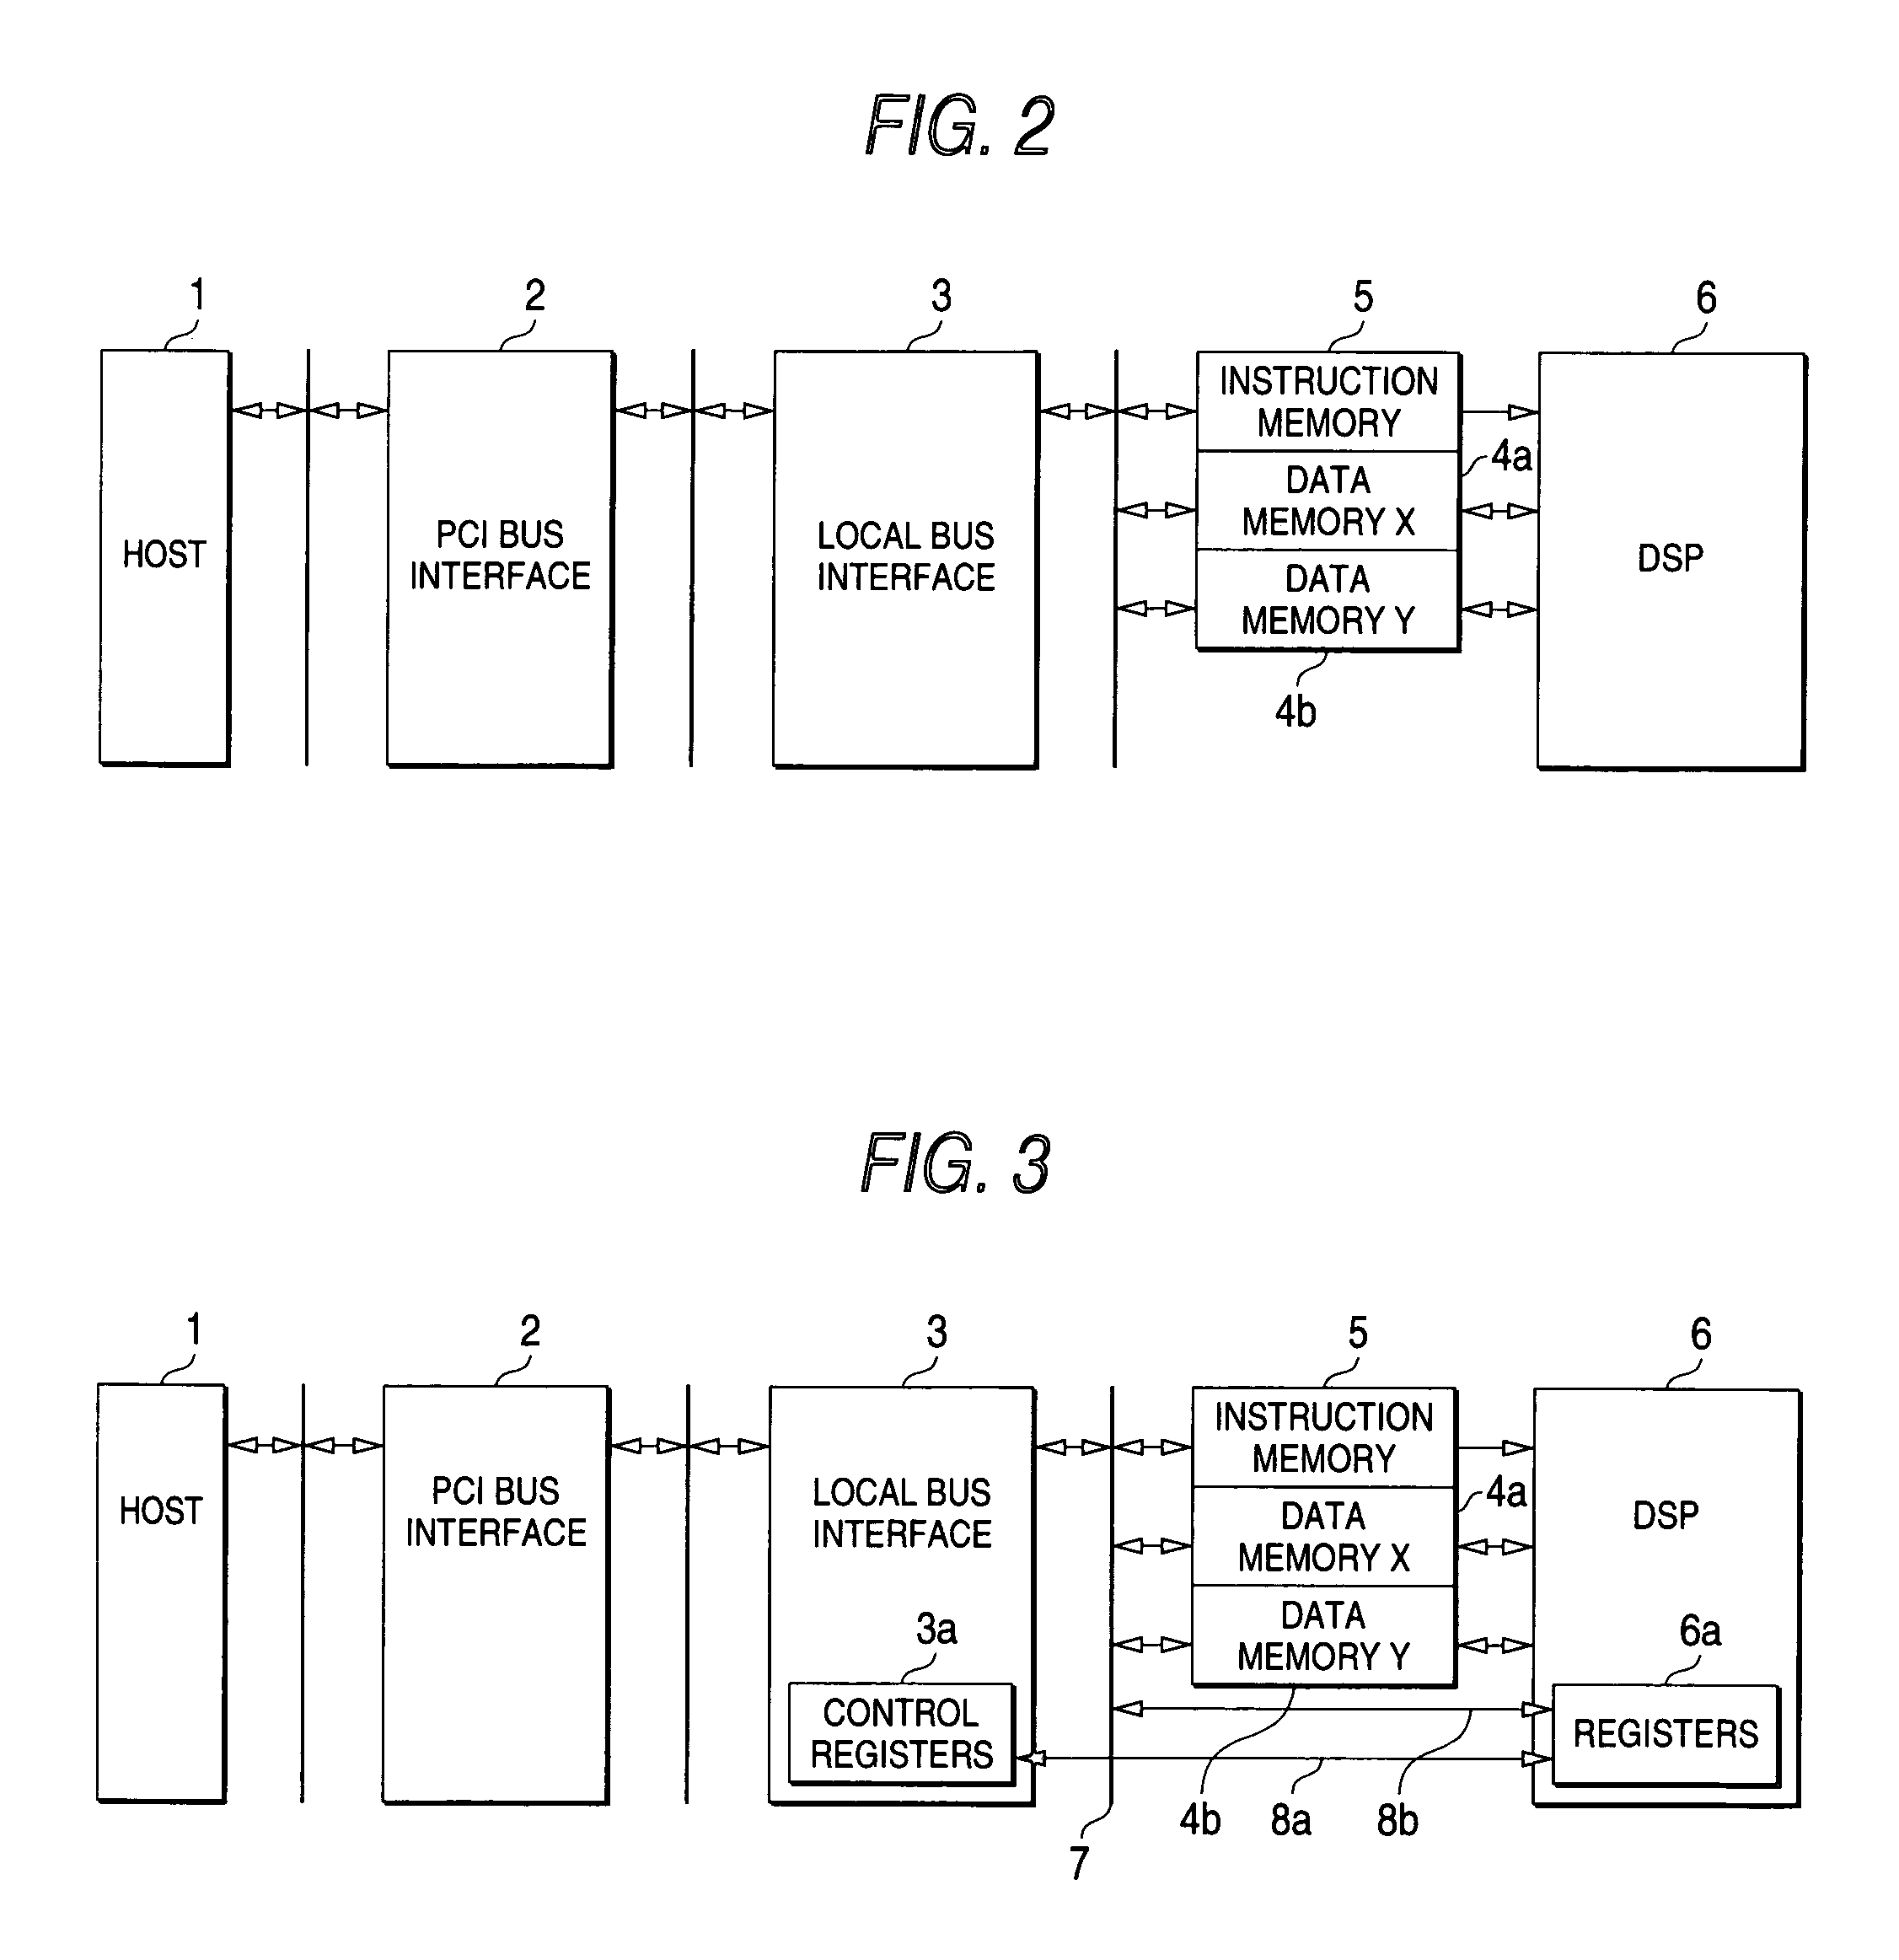 Digital signal processor including an interface therein capable of allowing direct access to registers from an external device